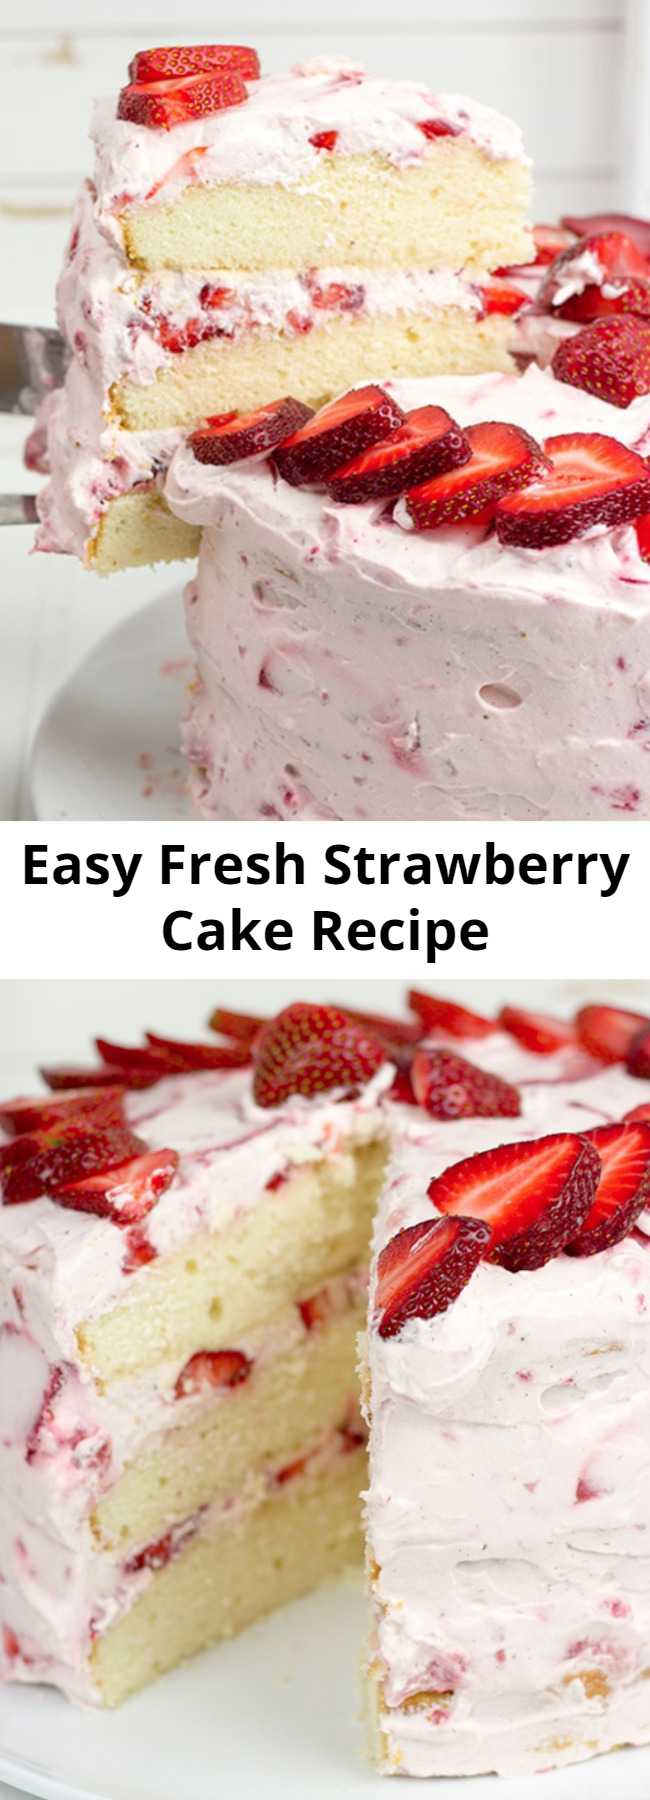 Easy Fresh Strawberry Cake Recipe - This cake features loads of fresh strawberries and a light whipped cream topping. It's PERFECT for summer!!